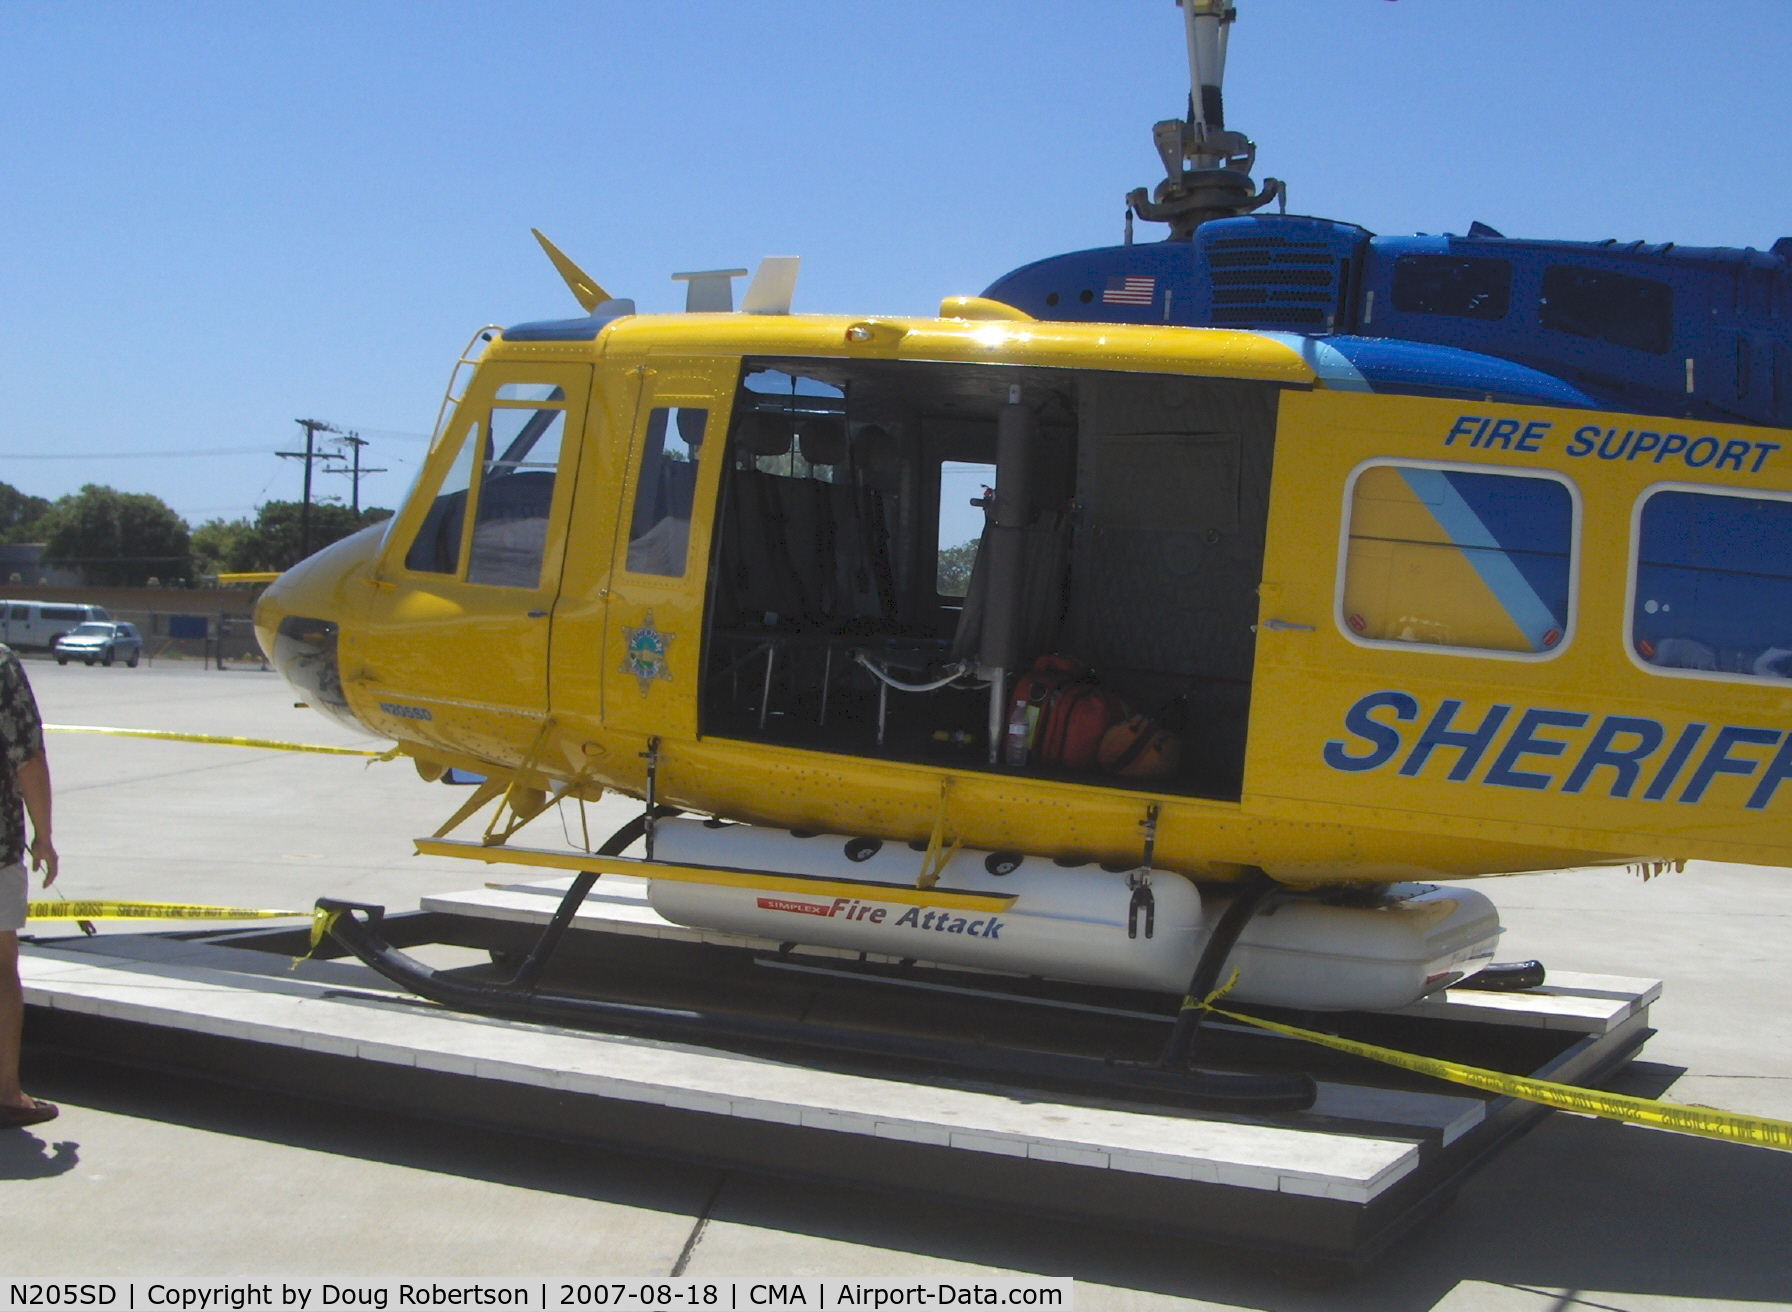 N205SD, 1970 Bell HH-1H Iroquois C/N 17116, 1970 Bell HH1H, one Lycoming T-53-C-13 turboshaft 1,400 hp, completely rebuilt from wartime service as Bell Iroquois Huey, Ventura County Sheriff's Dept. #6, Search & Rescue equipped